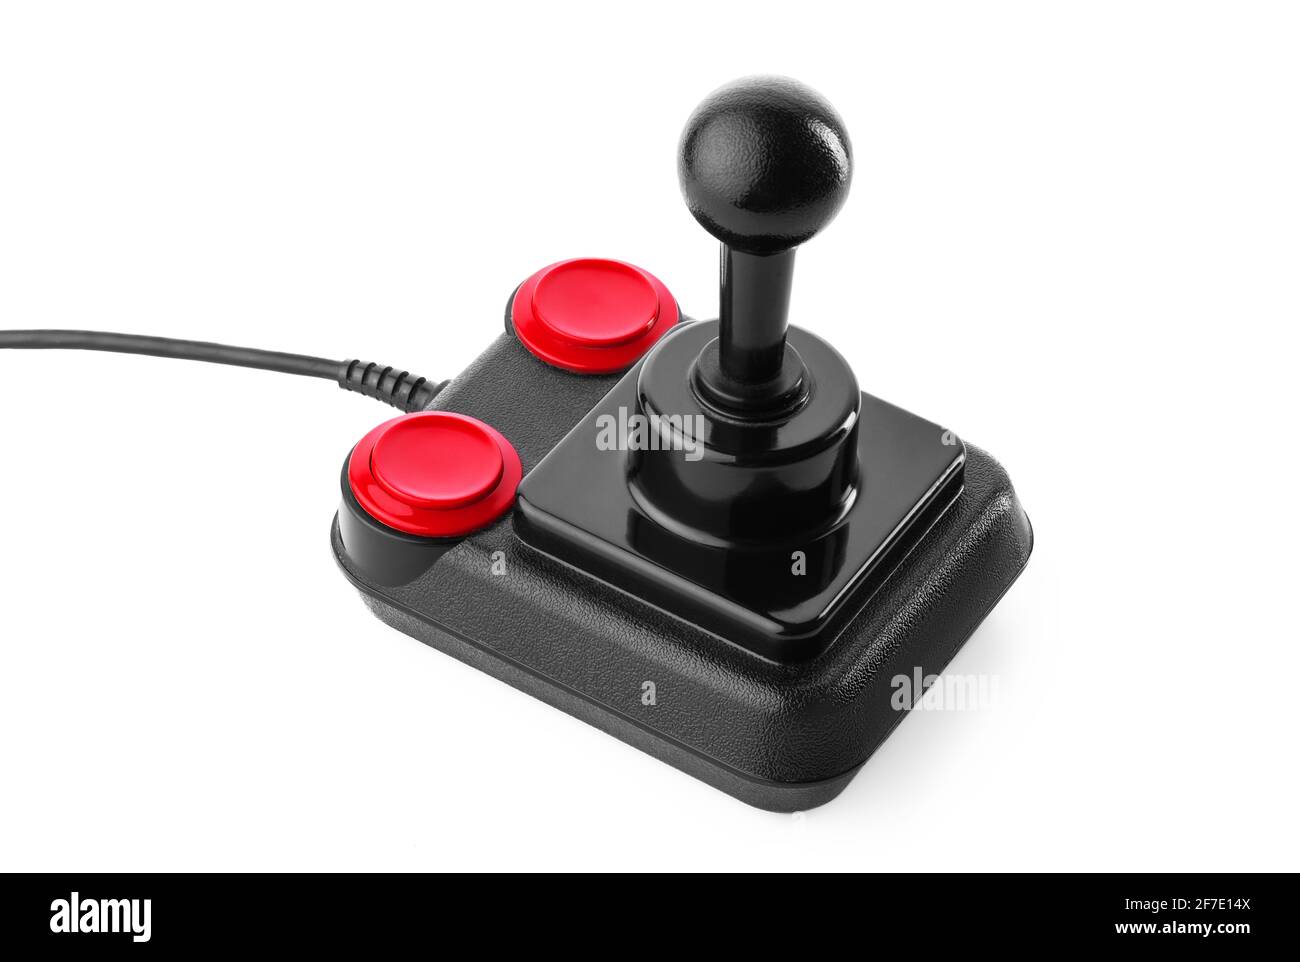 Retro joystick from 8-bit consoles. Game controller isolated on white background Stock Photo